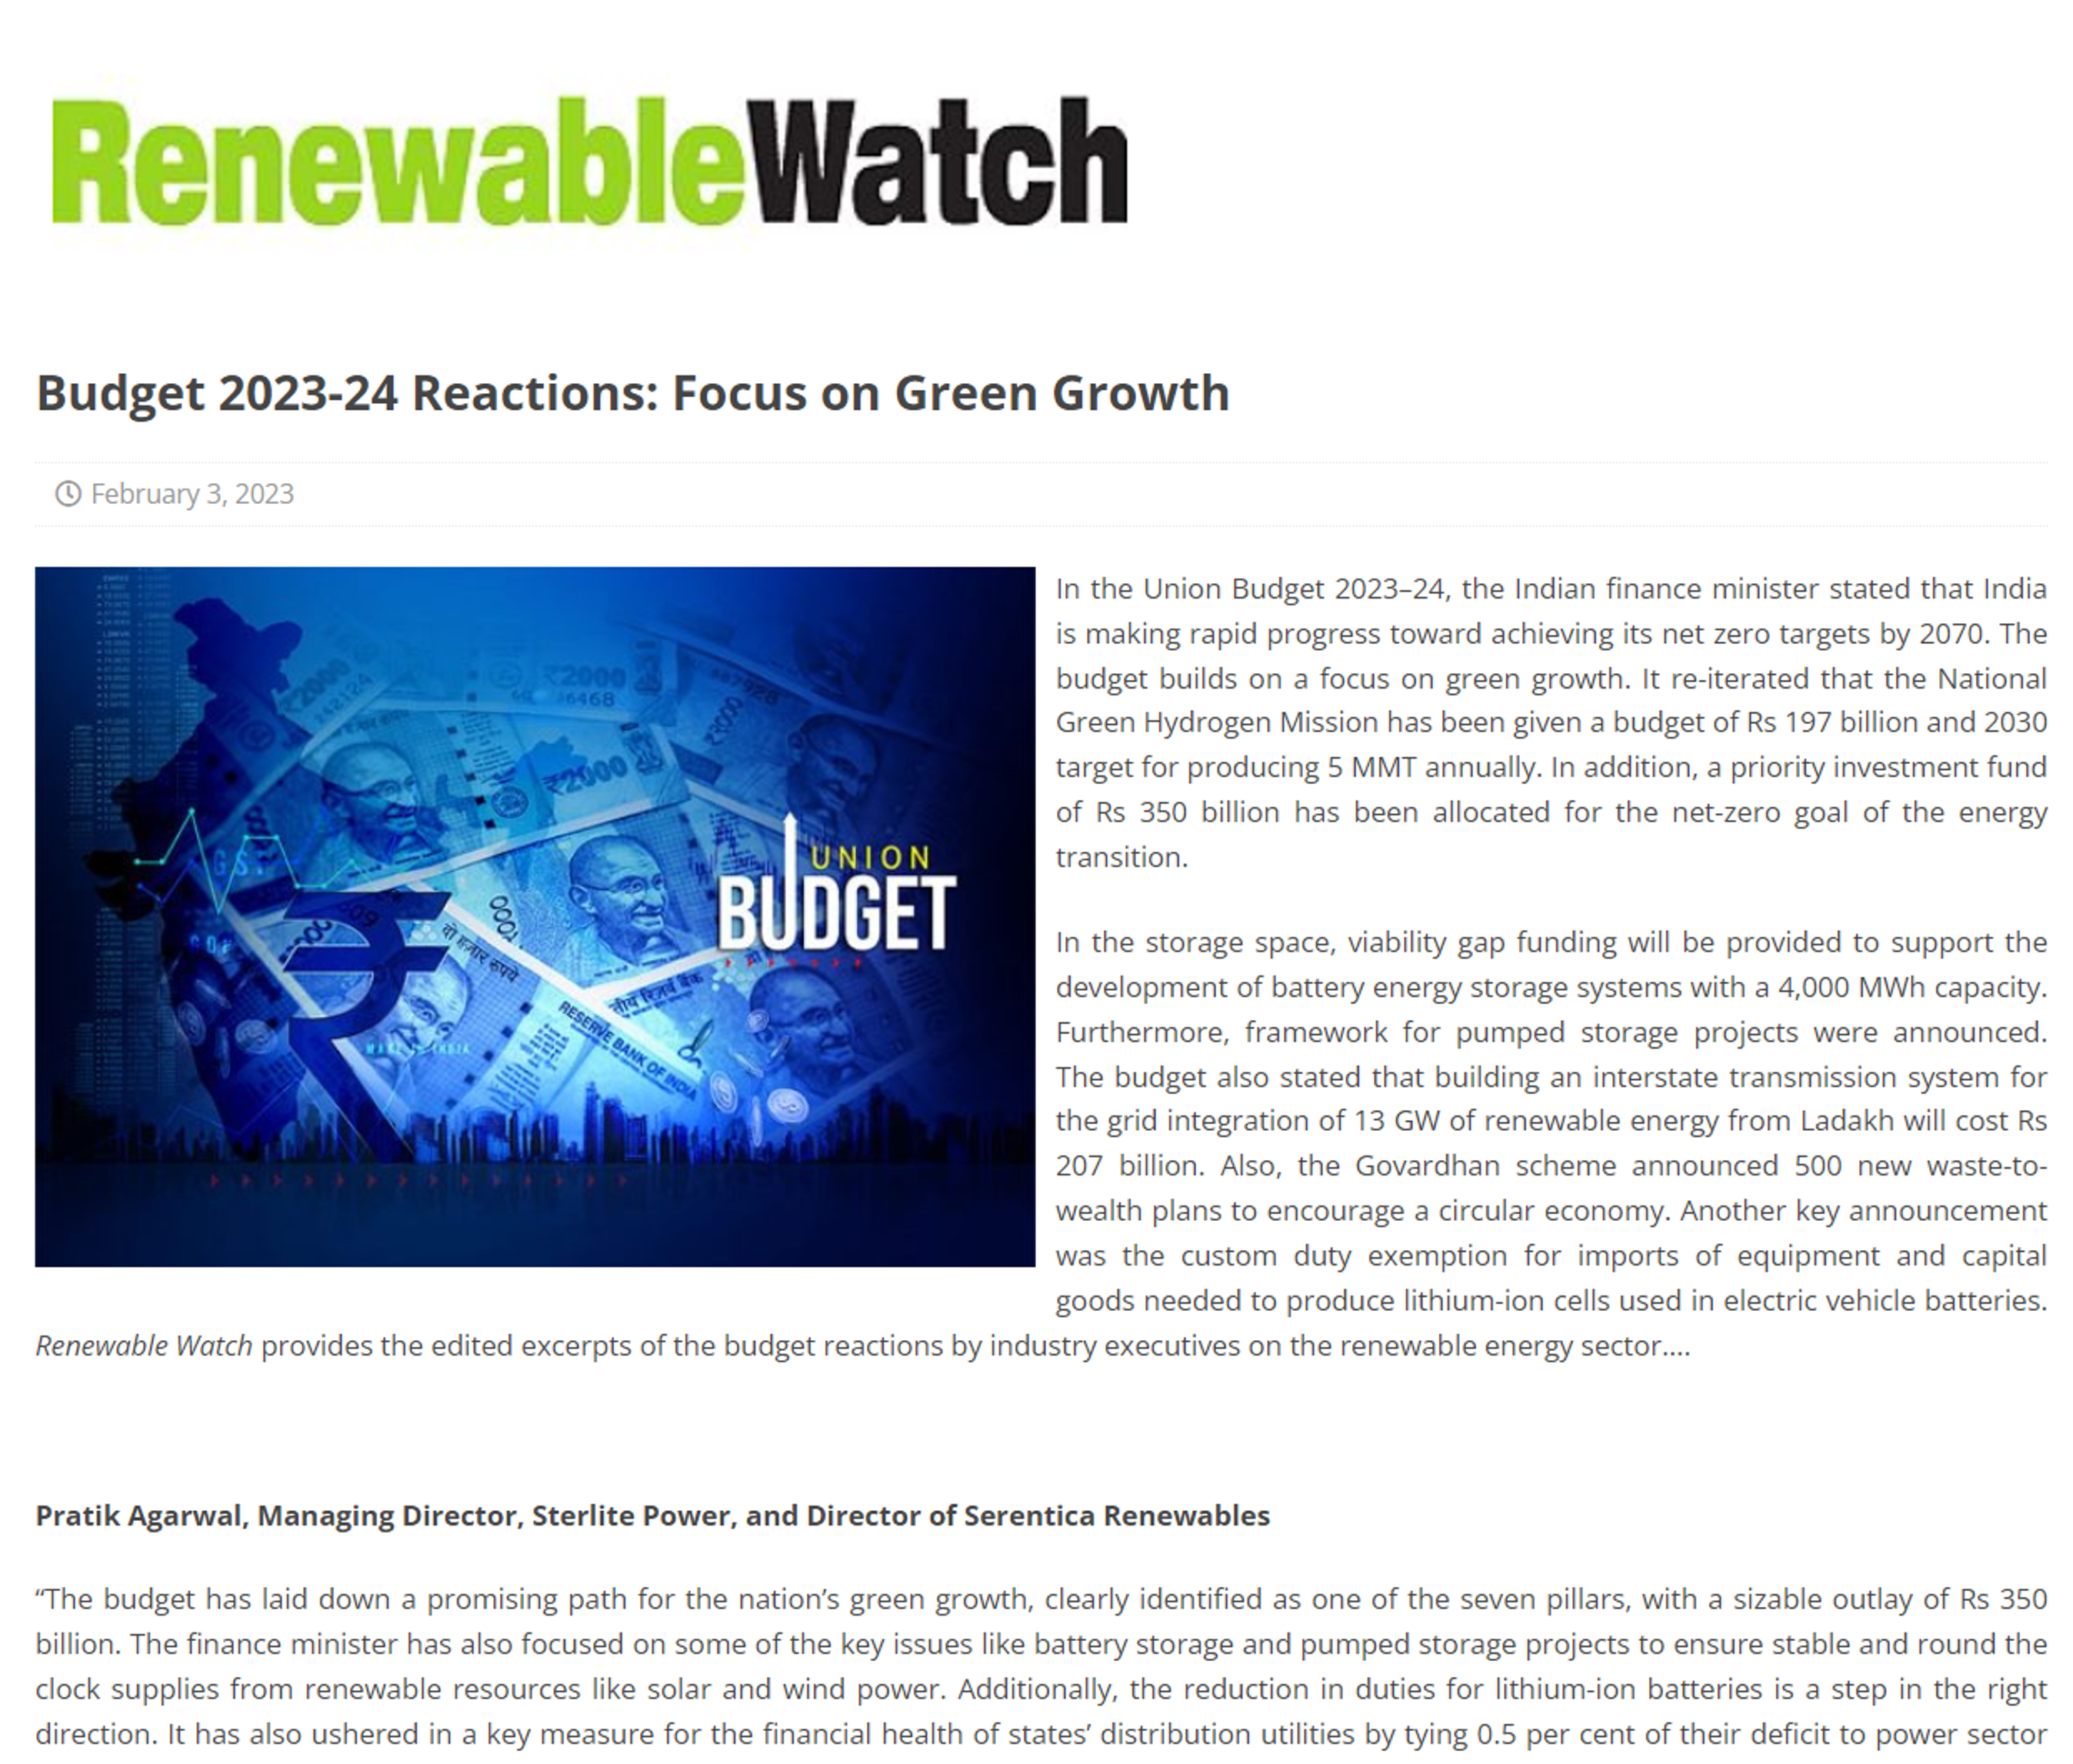 Abhishek Nath and Dr Ammu Susanna Jacob’s perspectives on the union budget announcements for green growth covered by RenewableWatch 